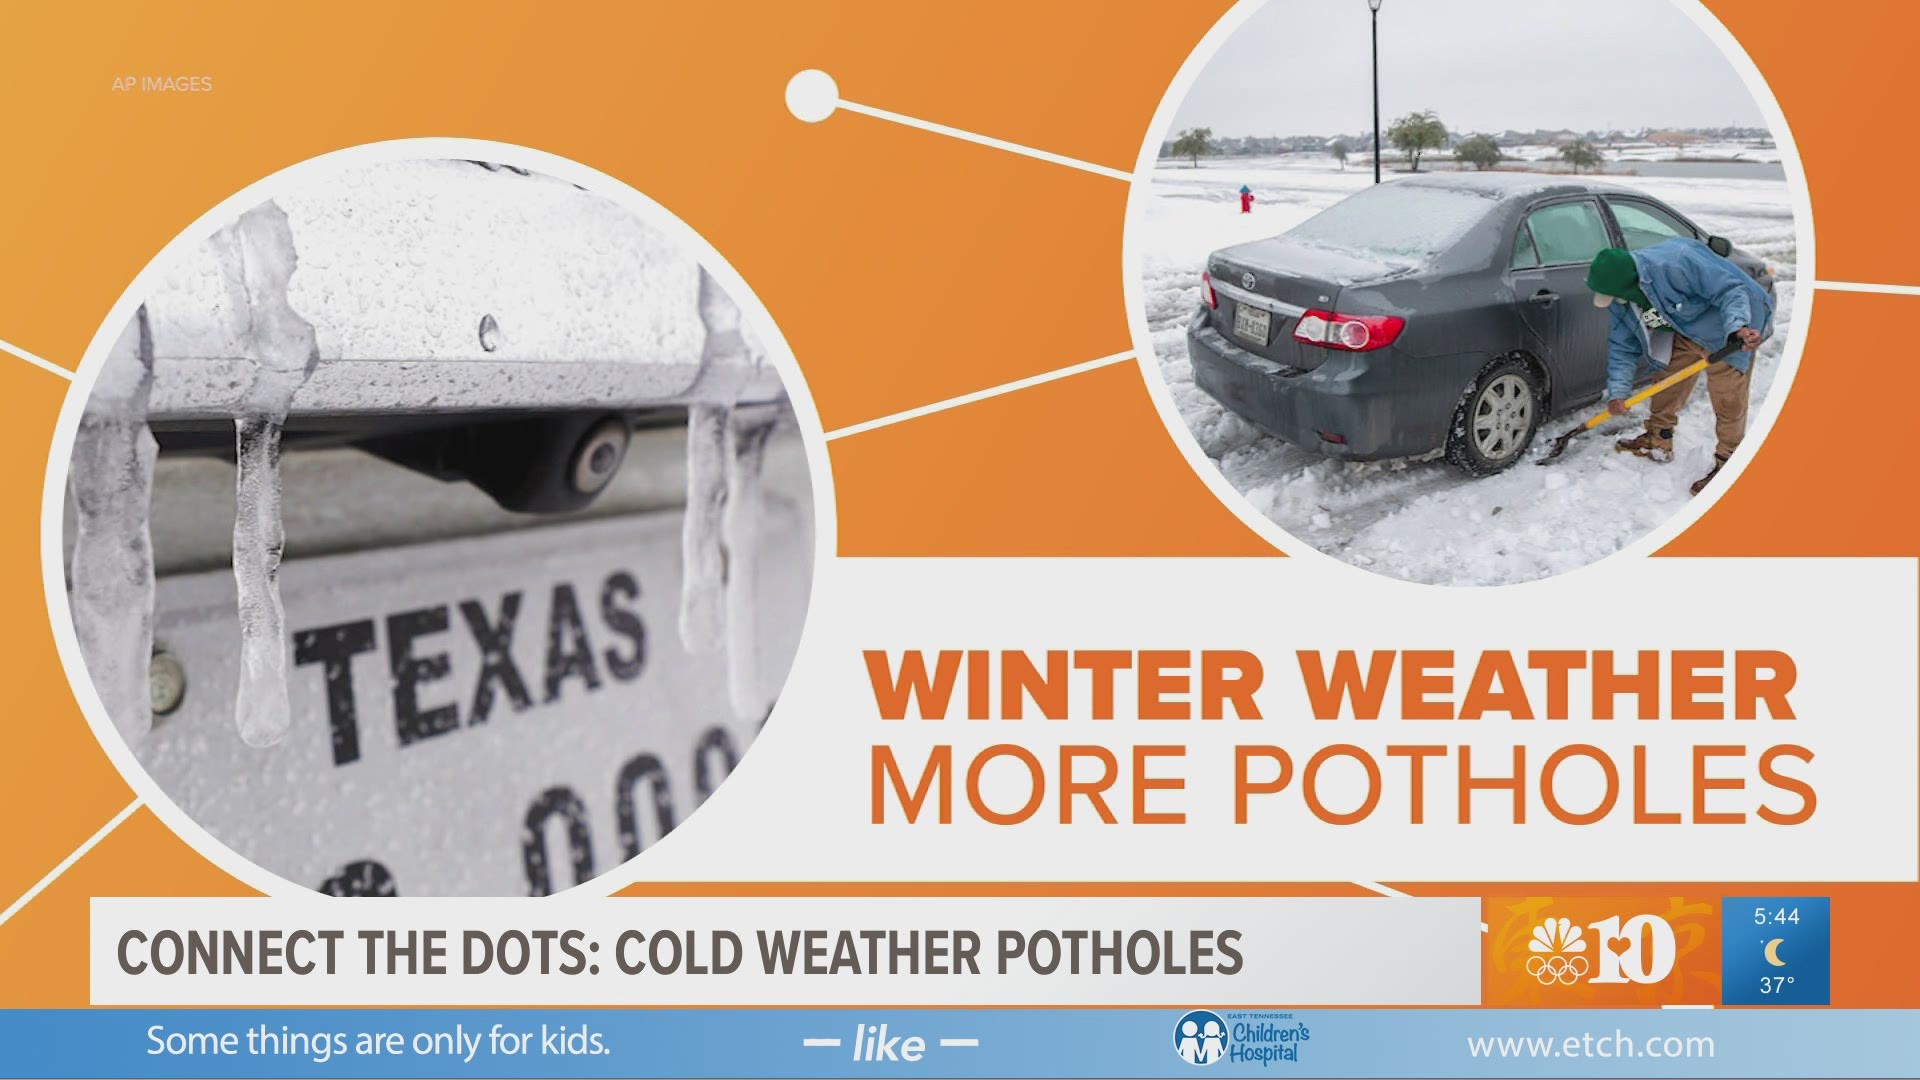 Freezing temperatures and winter weather can mean more than just power outages and burst pipe, it could also mean more potholes.